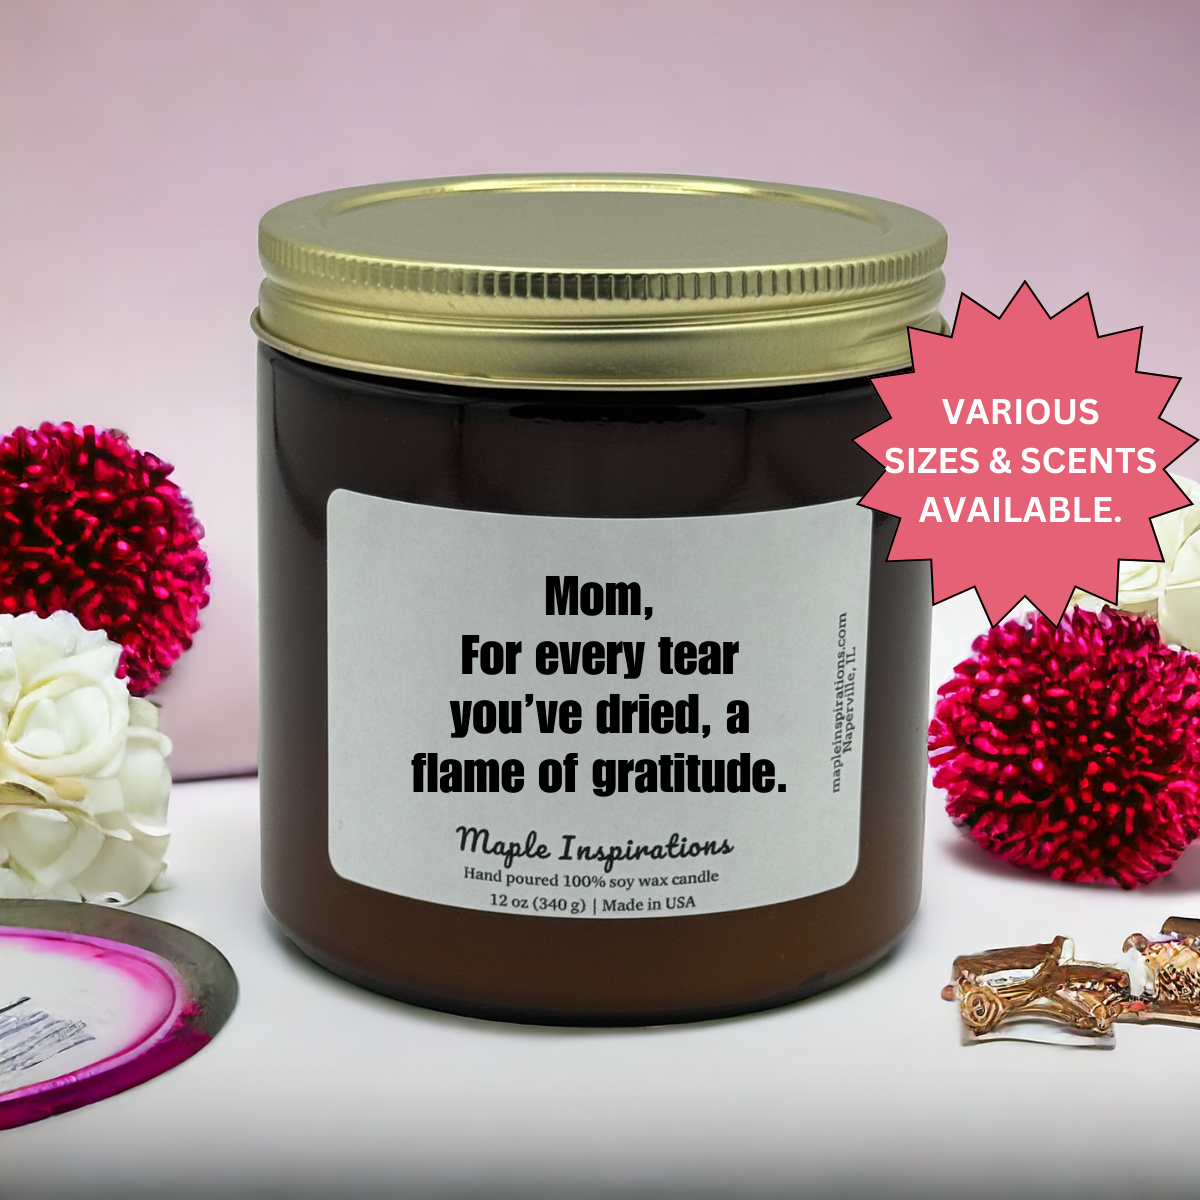 Mom for every tear you're dried a flame of gratitude Candle Mom Gift, Mother's Day Gift for Mom, Wedding Day Gift Mom ,Mom Birthday, Mum, Gift From Daughter / Son